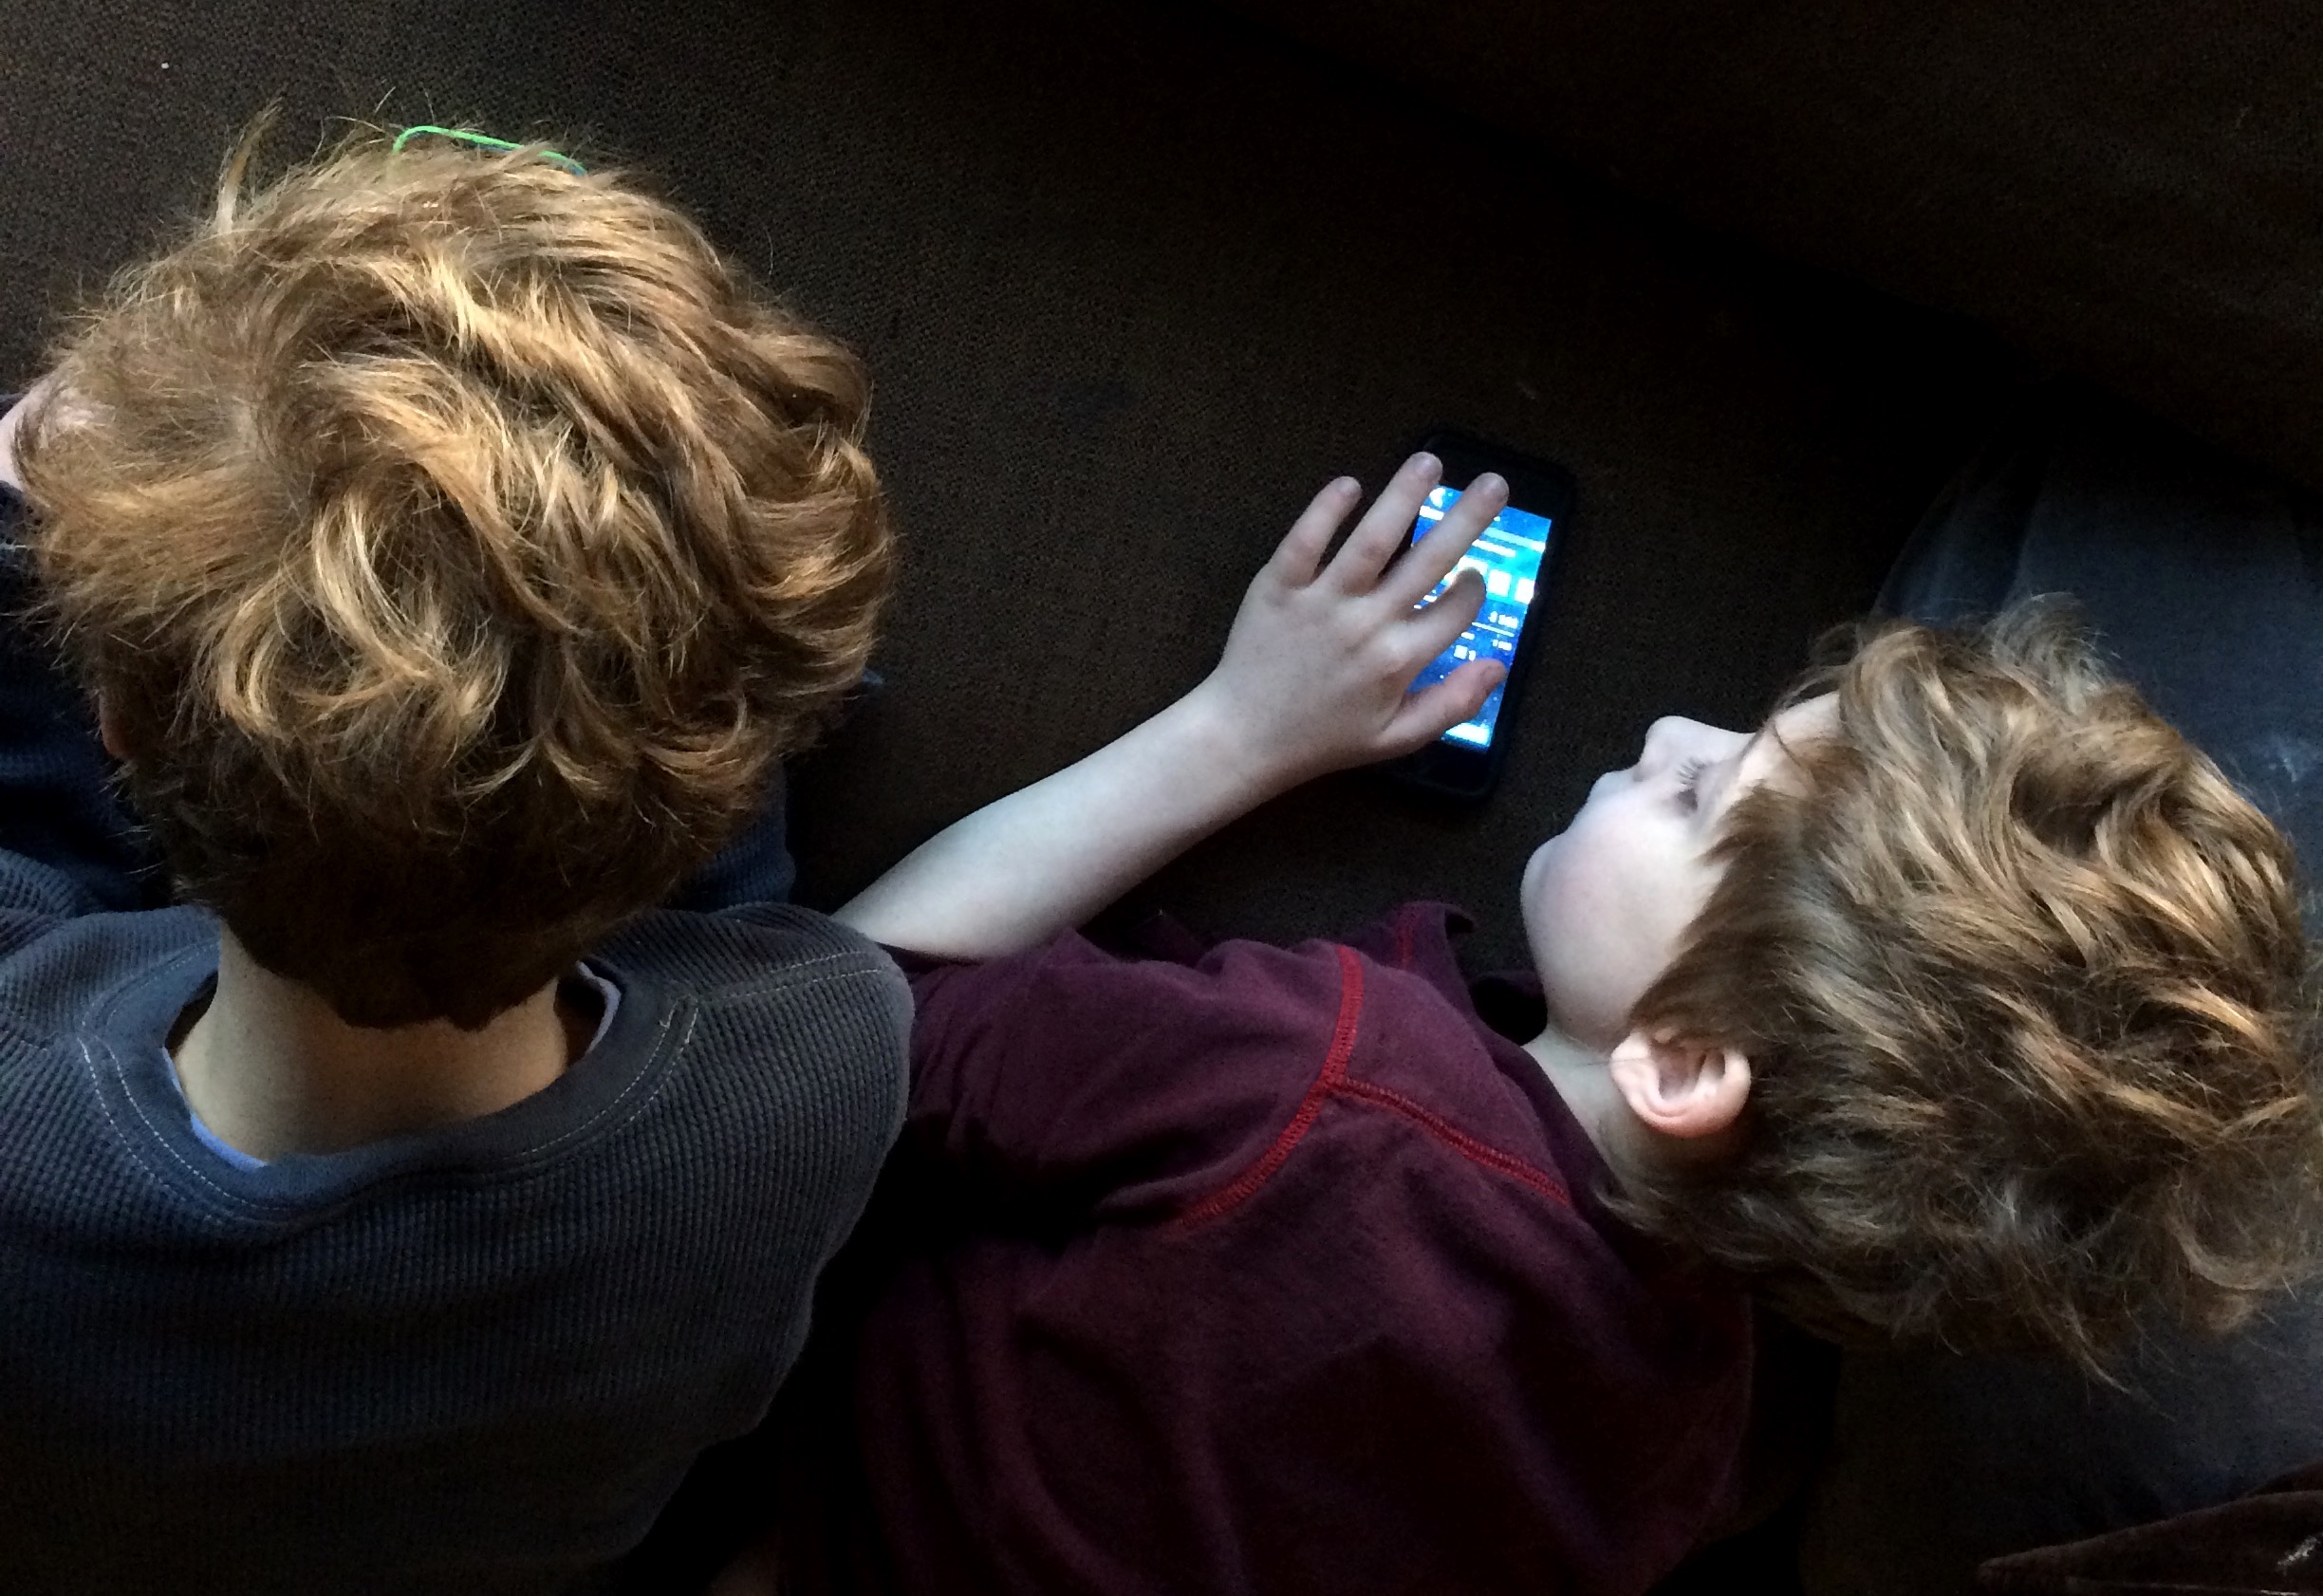 M and C, twin brothers, playing electronic devices next to each other